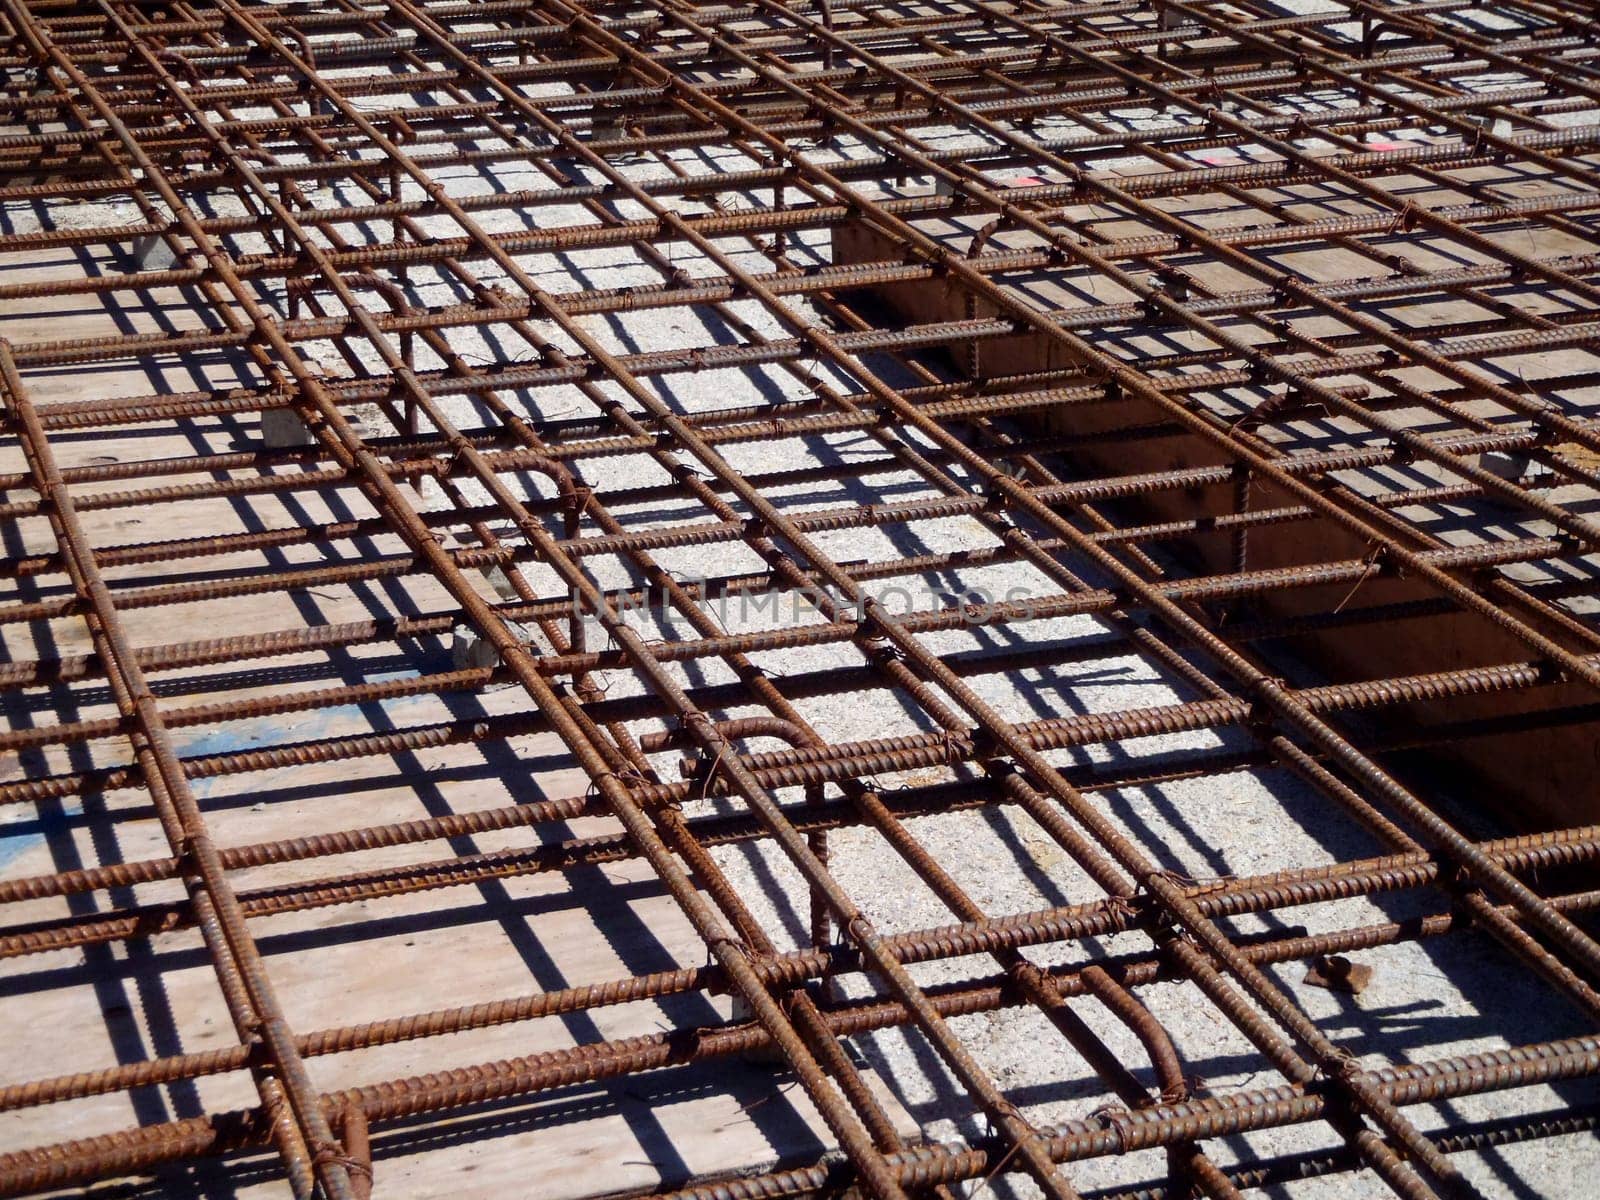 Interconnected with iron rods, and known as rebar, to reinforce the force soon to be poured concrete.